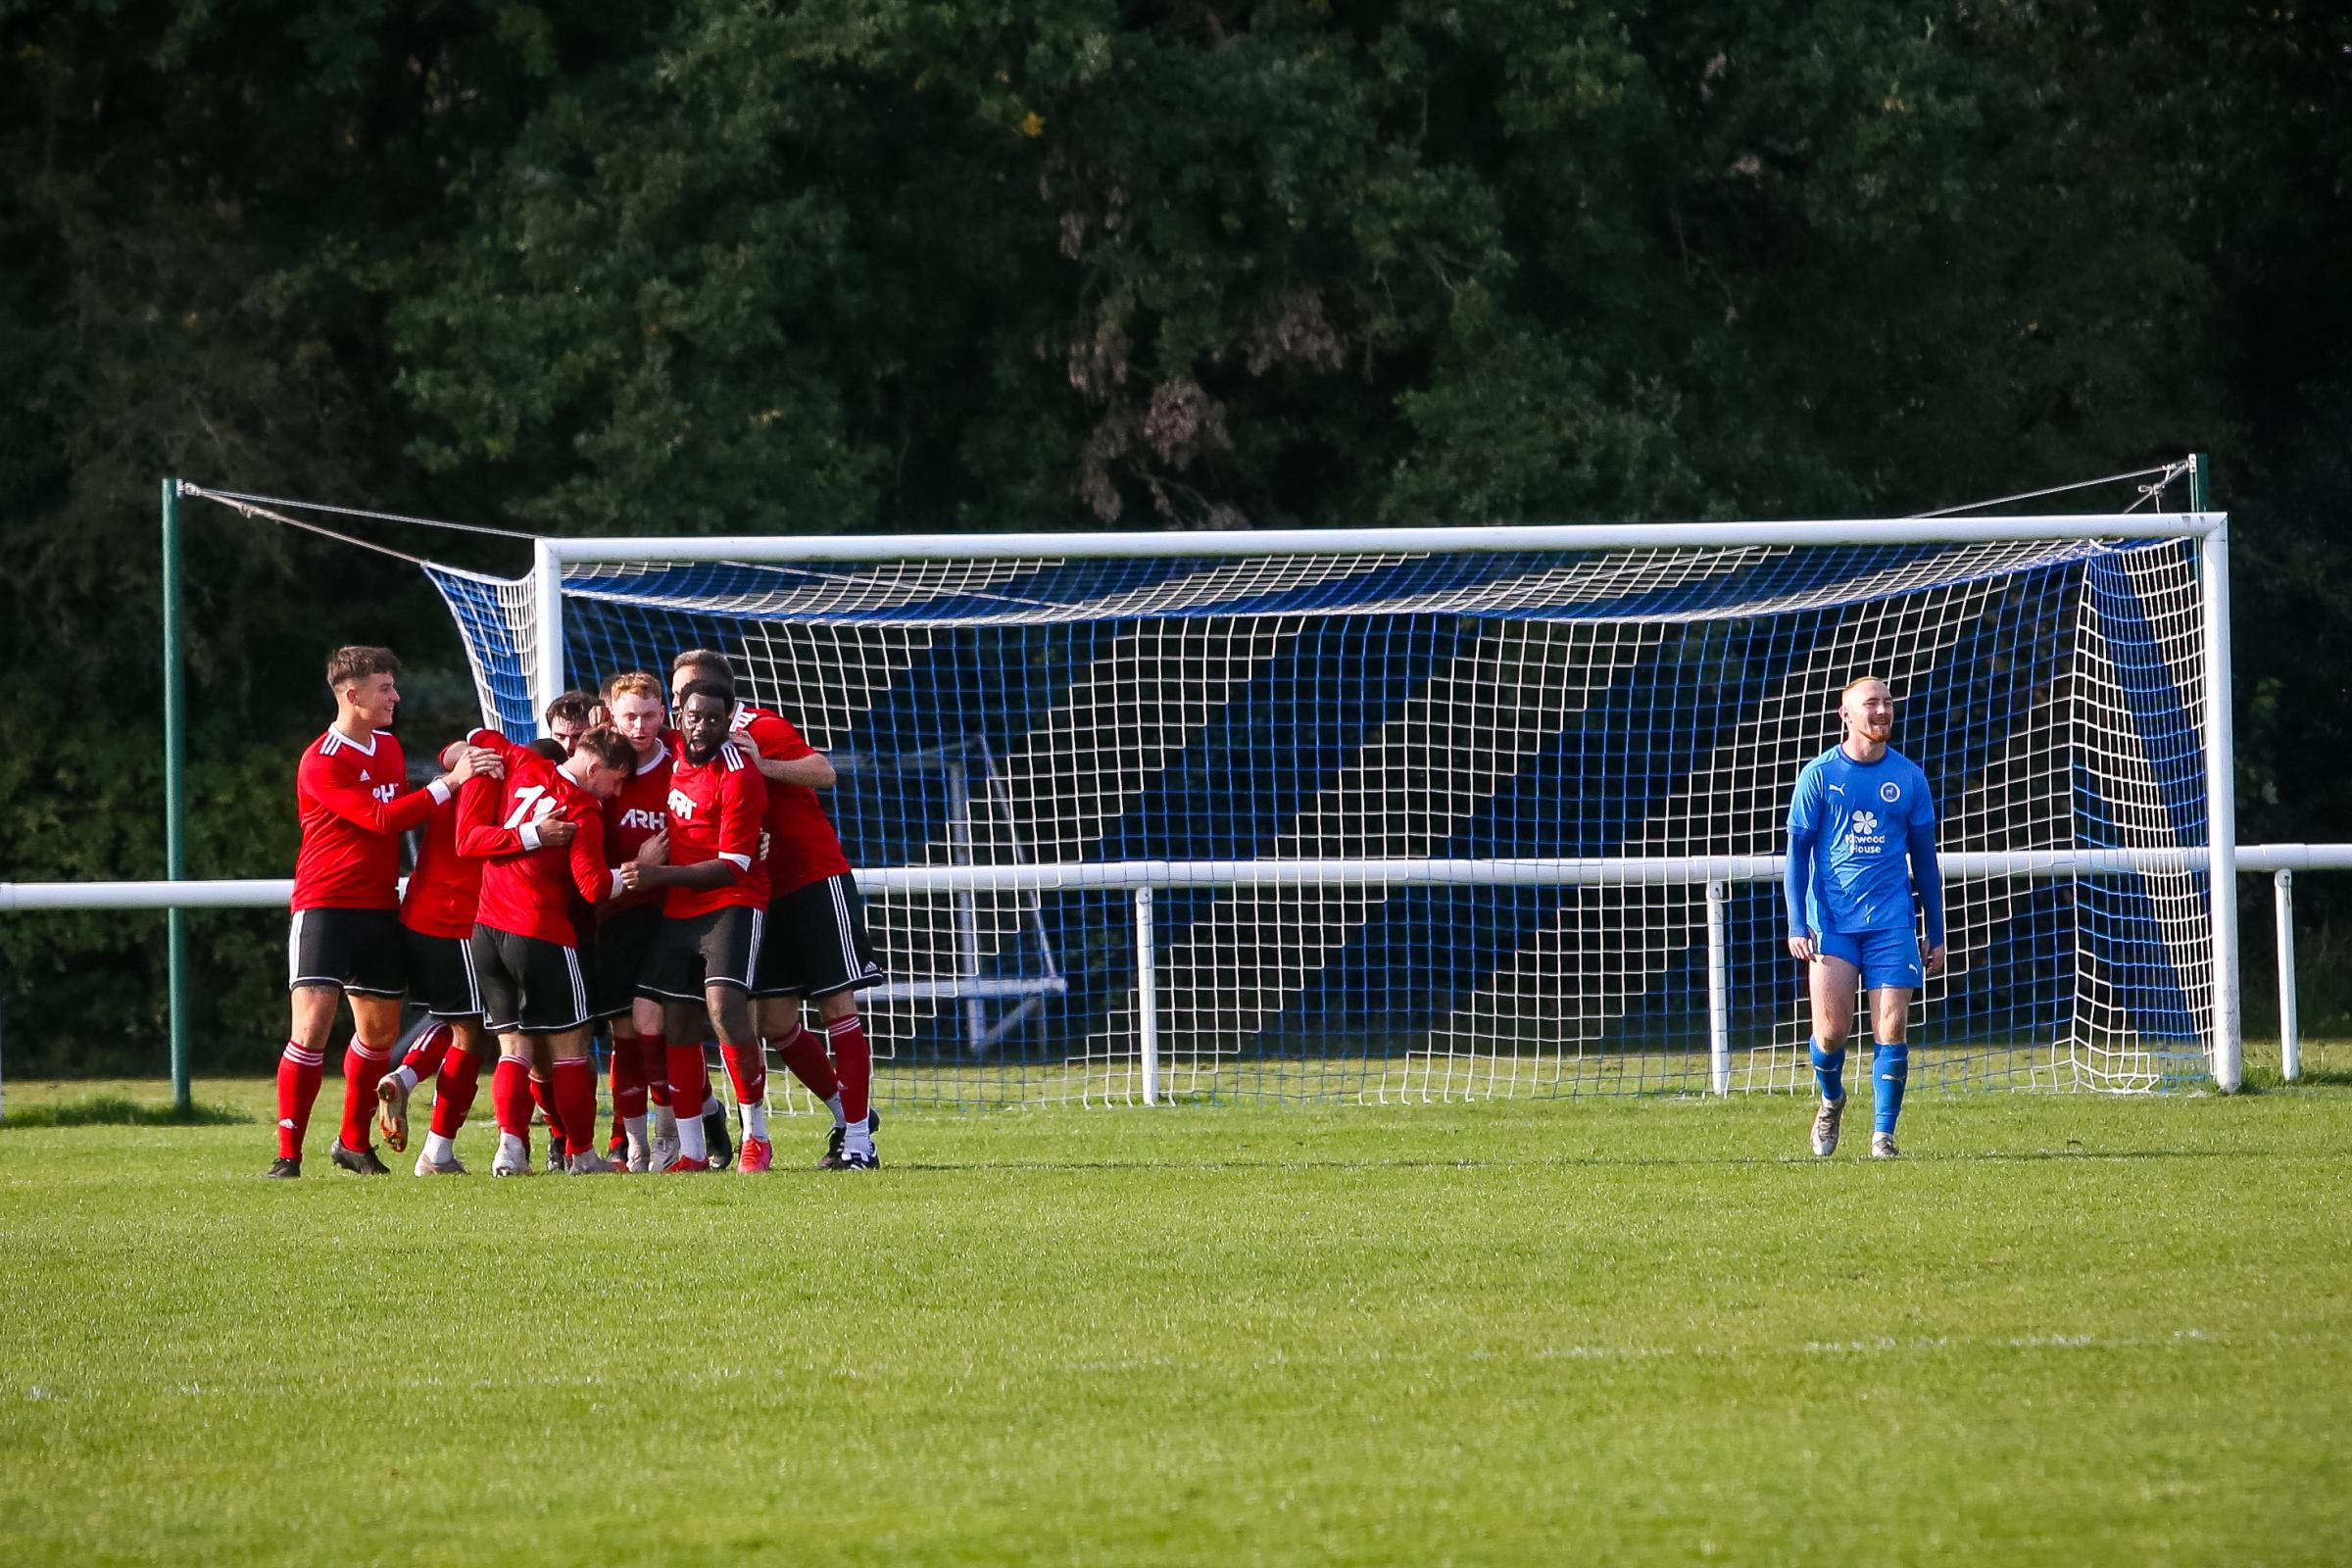 The celebrations that followed Markell Bennetts goal for Knutsford at Lostock Gralam. Picture by Karl Brooks Photography